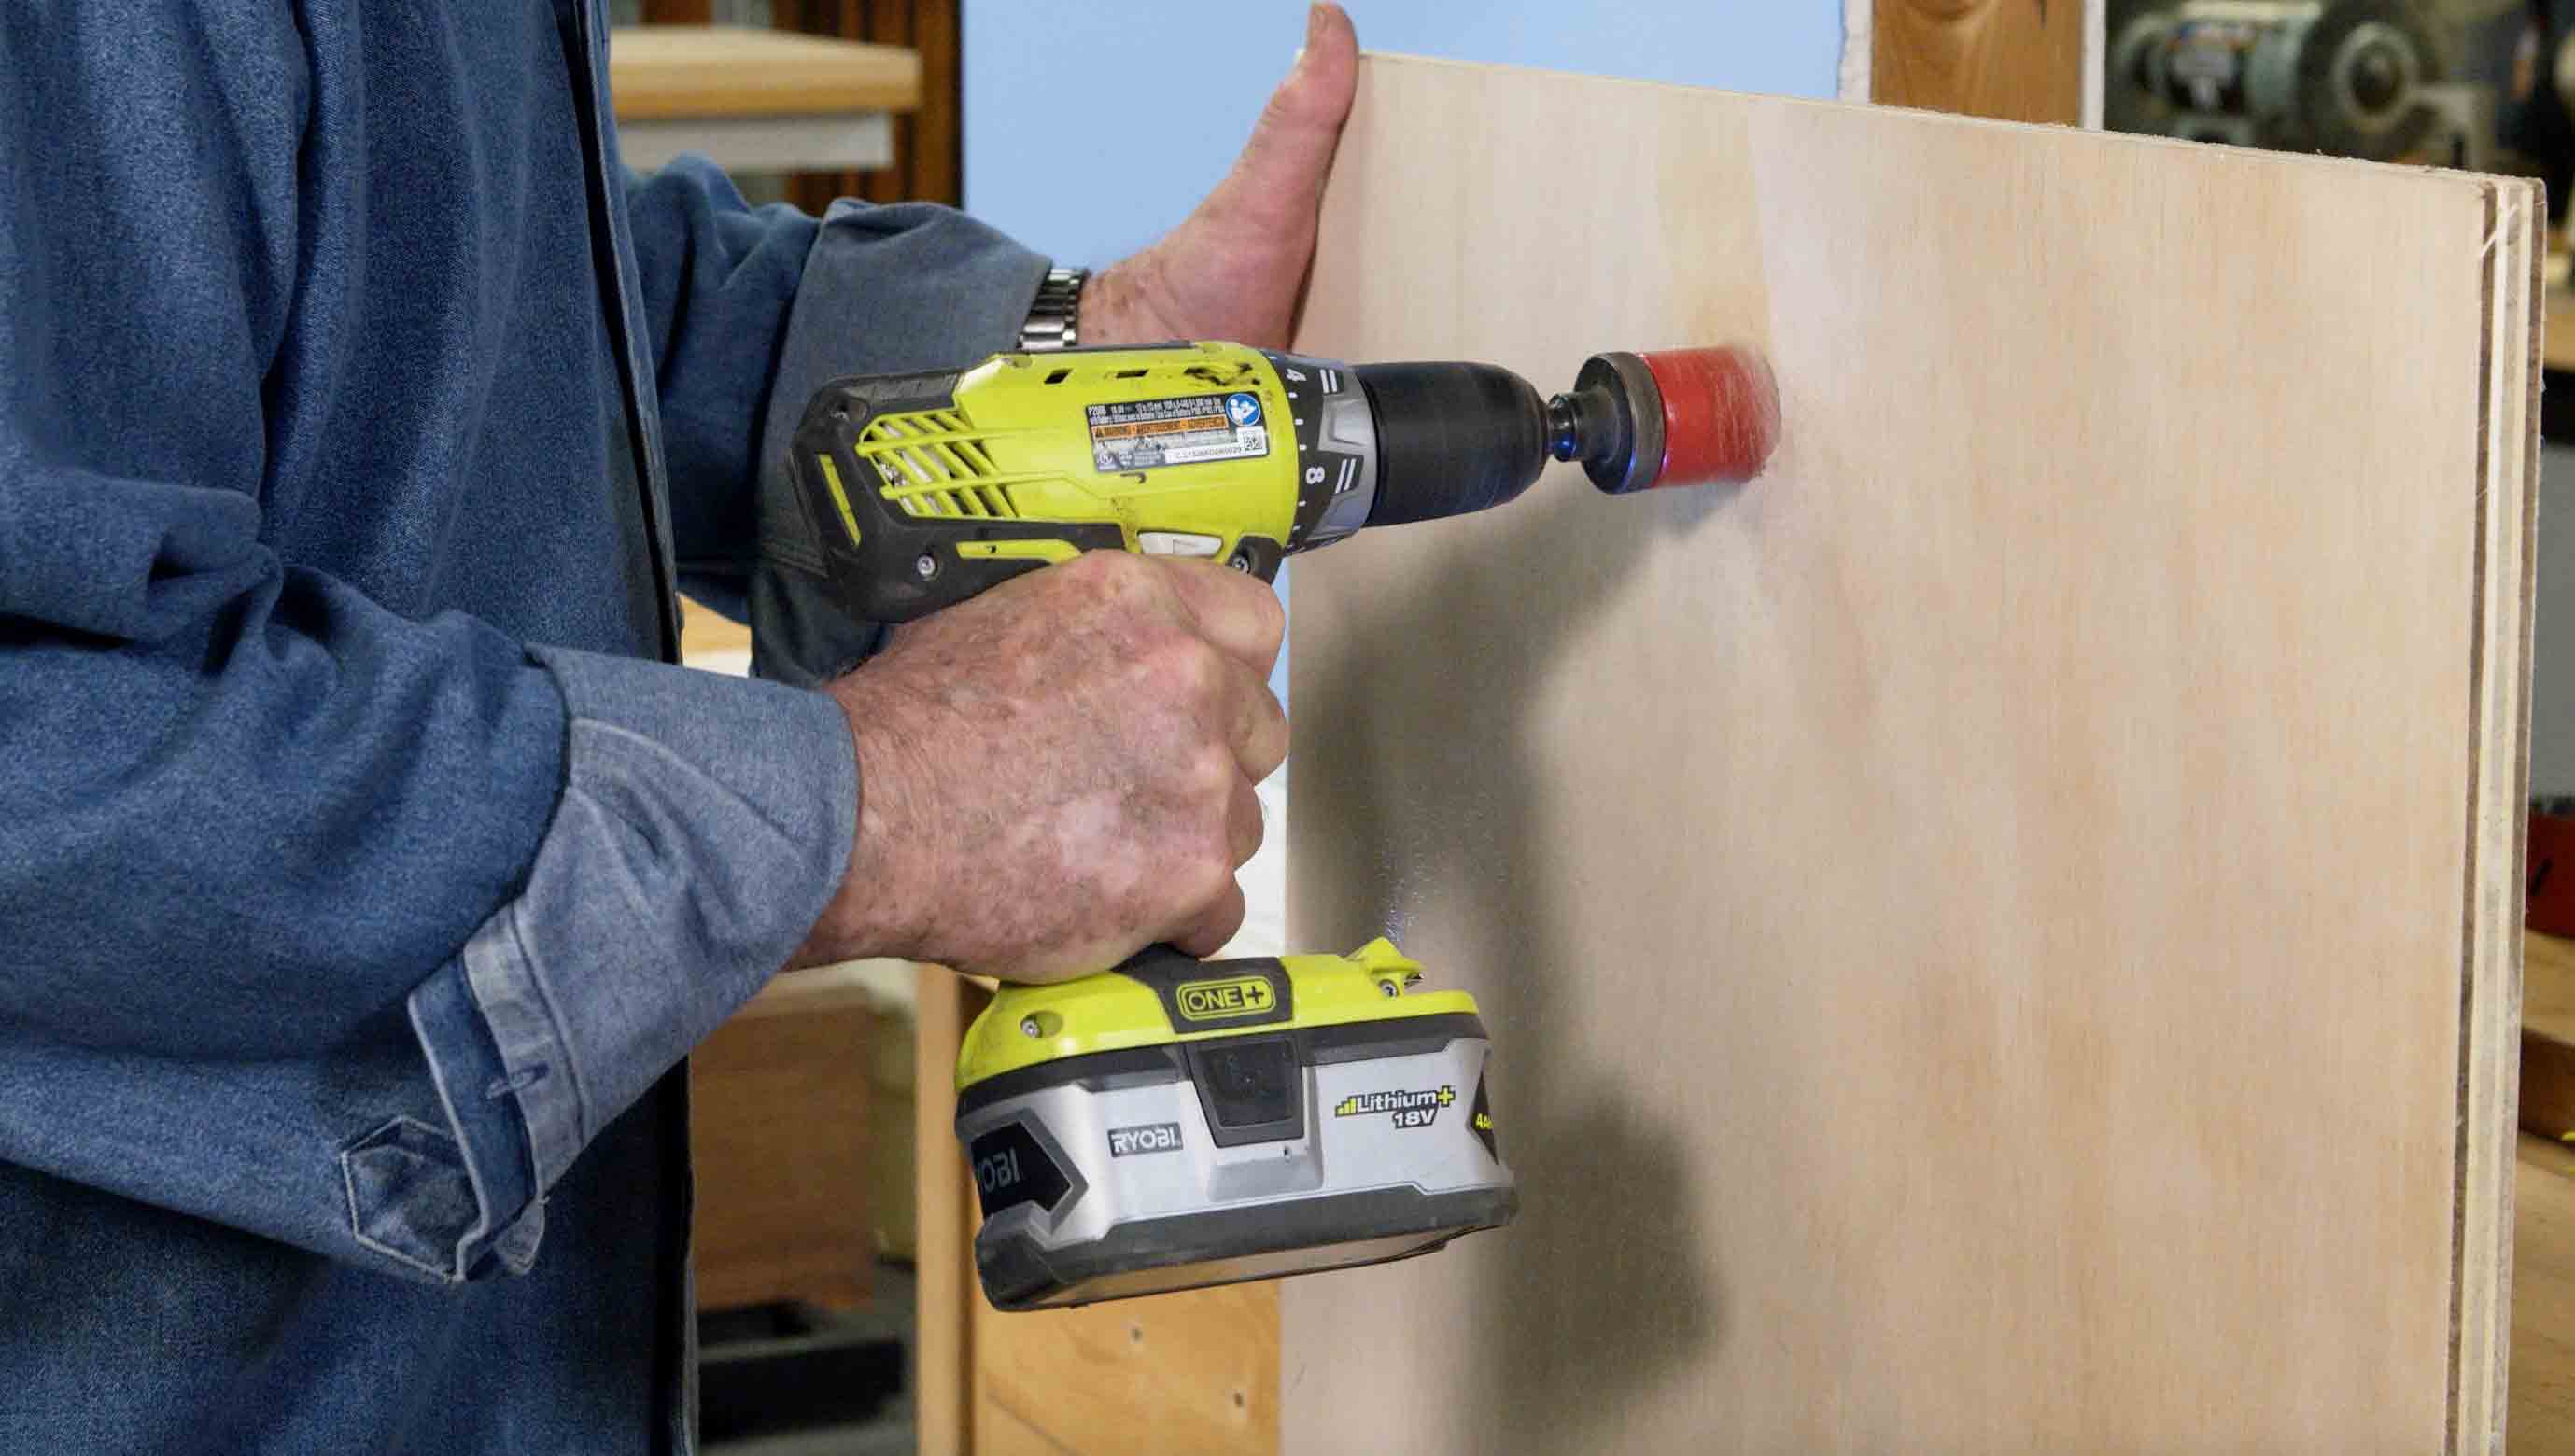 Man uses a hole saw to cut a hole in wood 